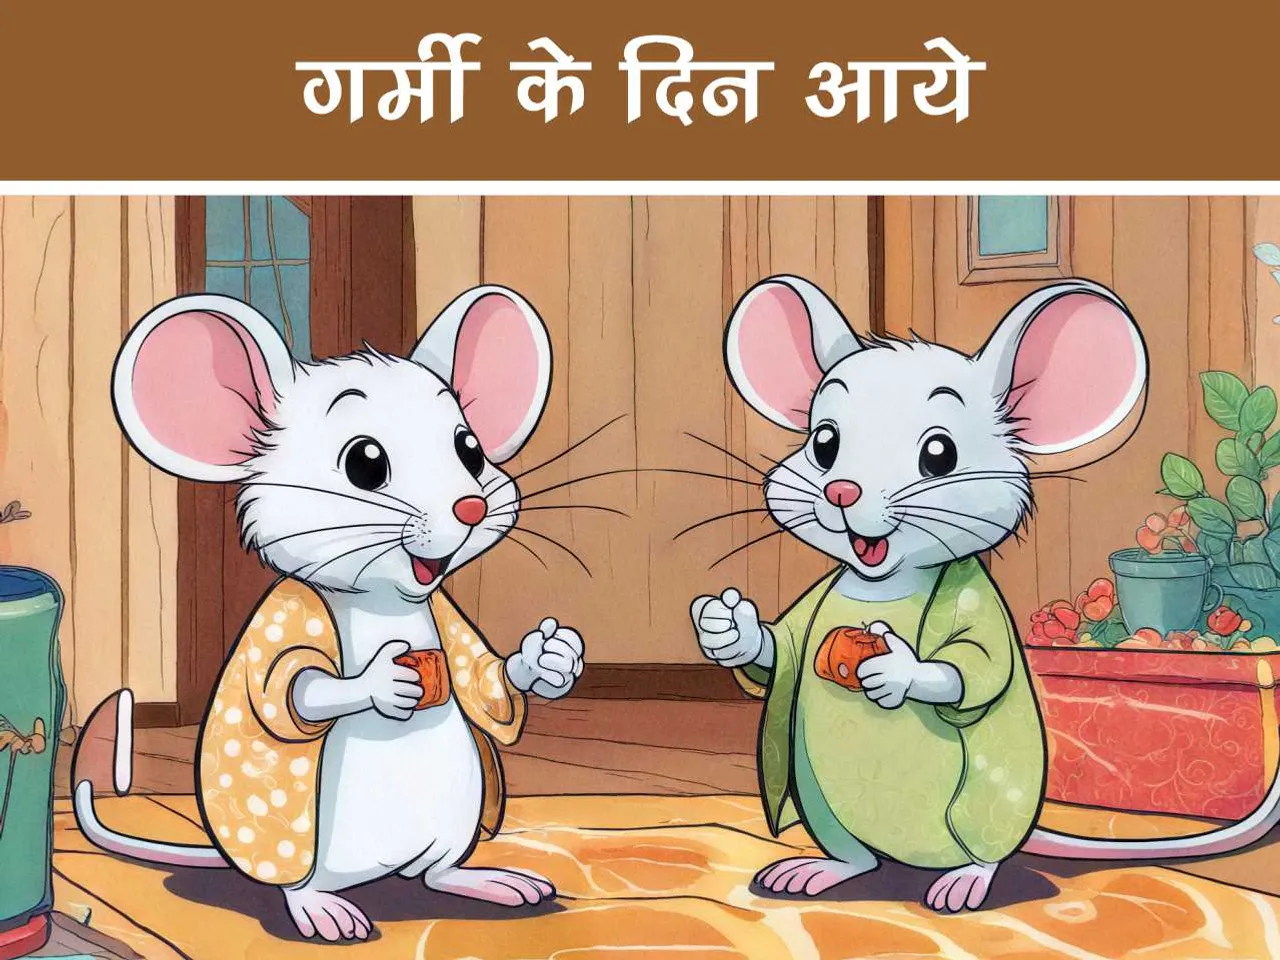 cartoon image of a mouse couple